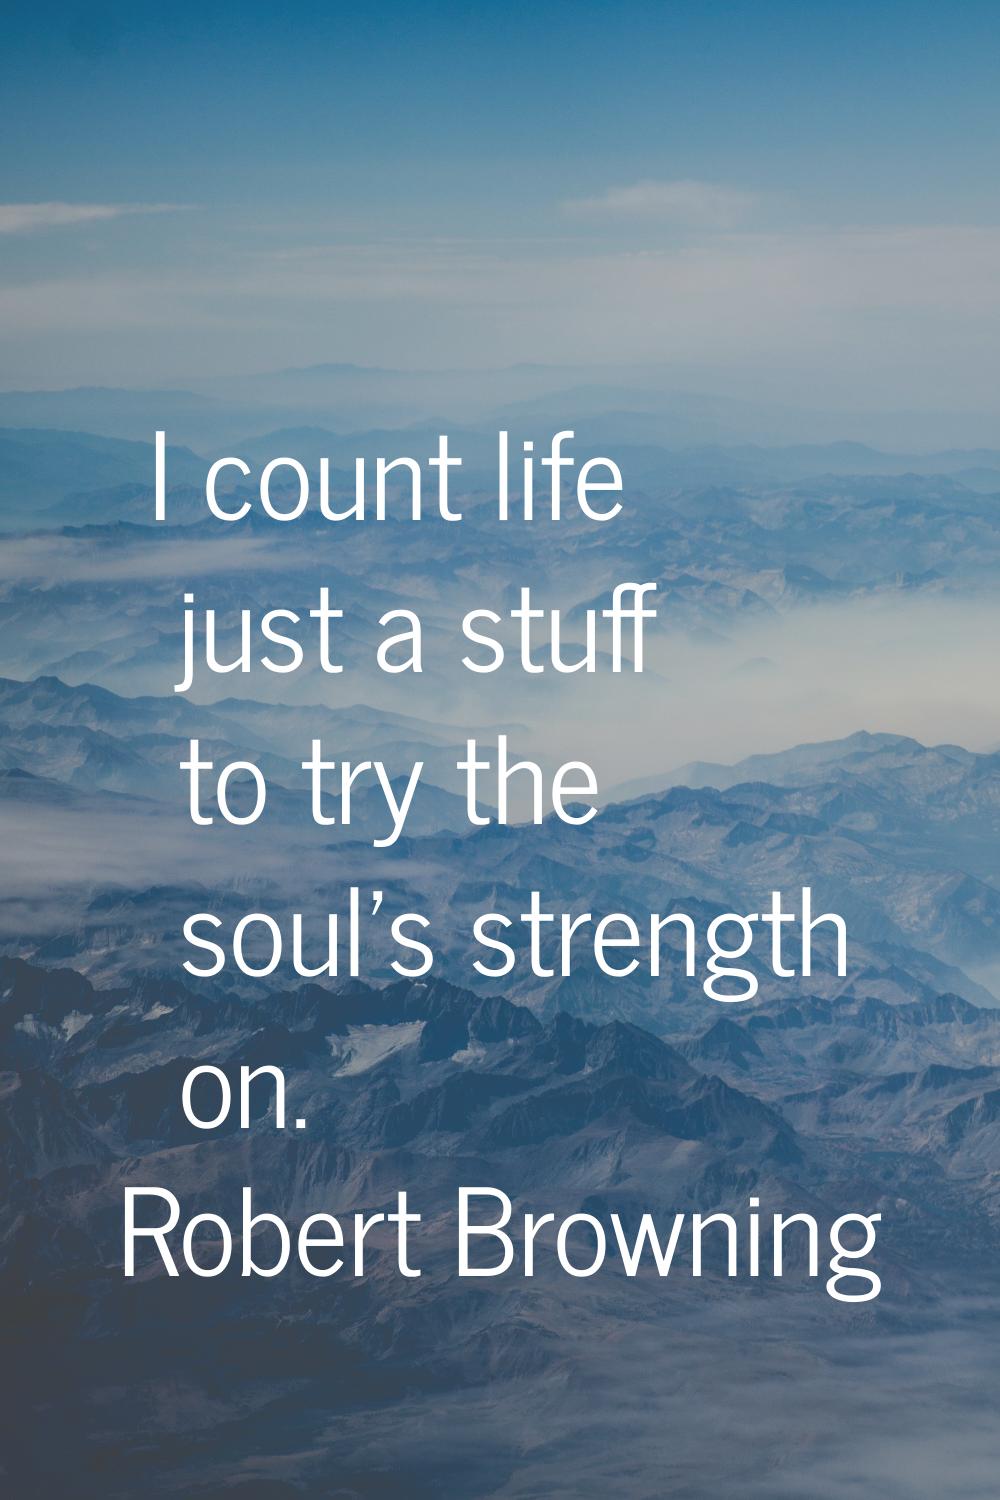 I count life just a stuff to try the soul's strength on.